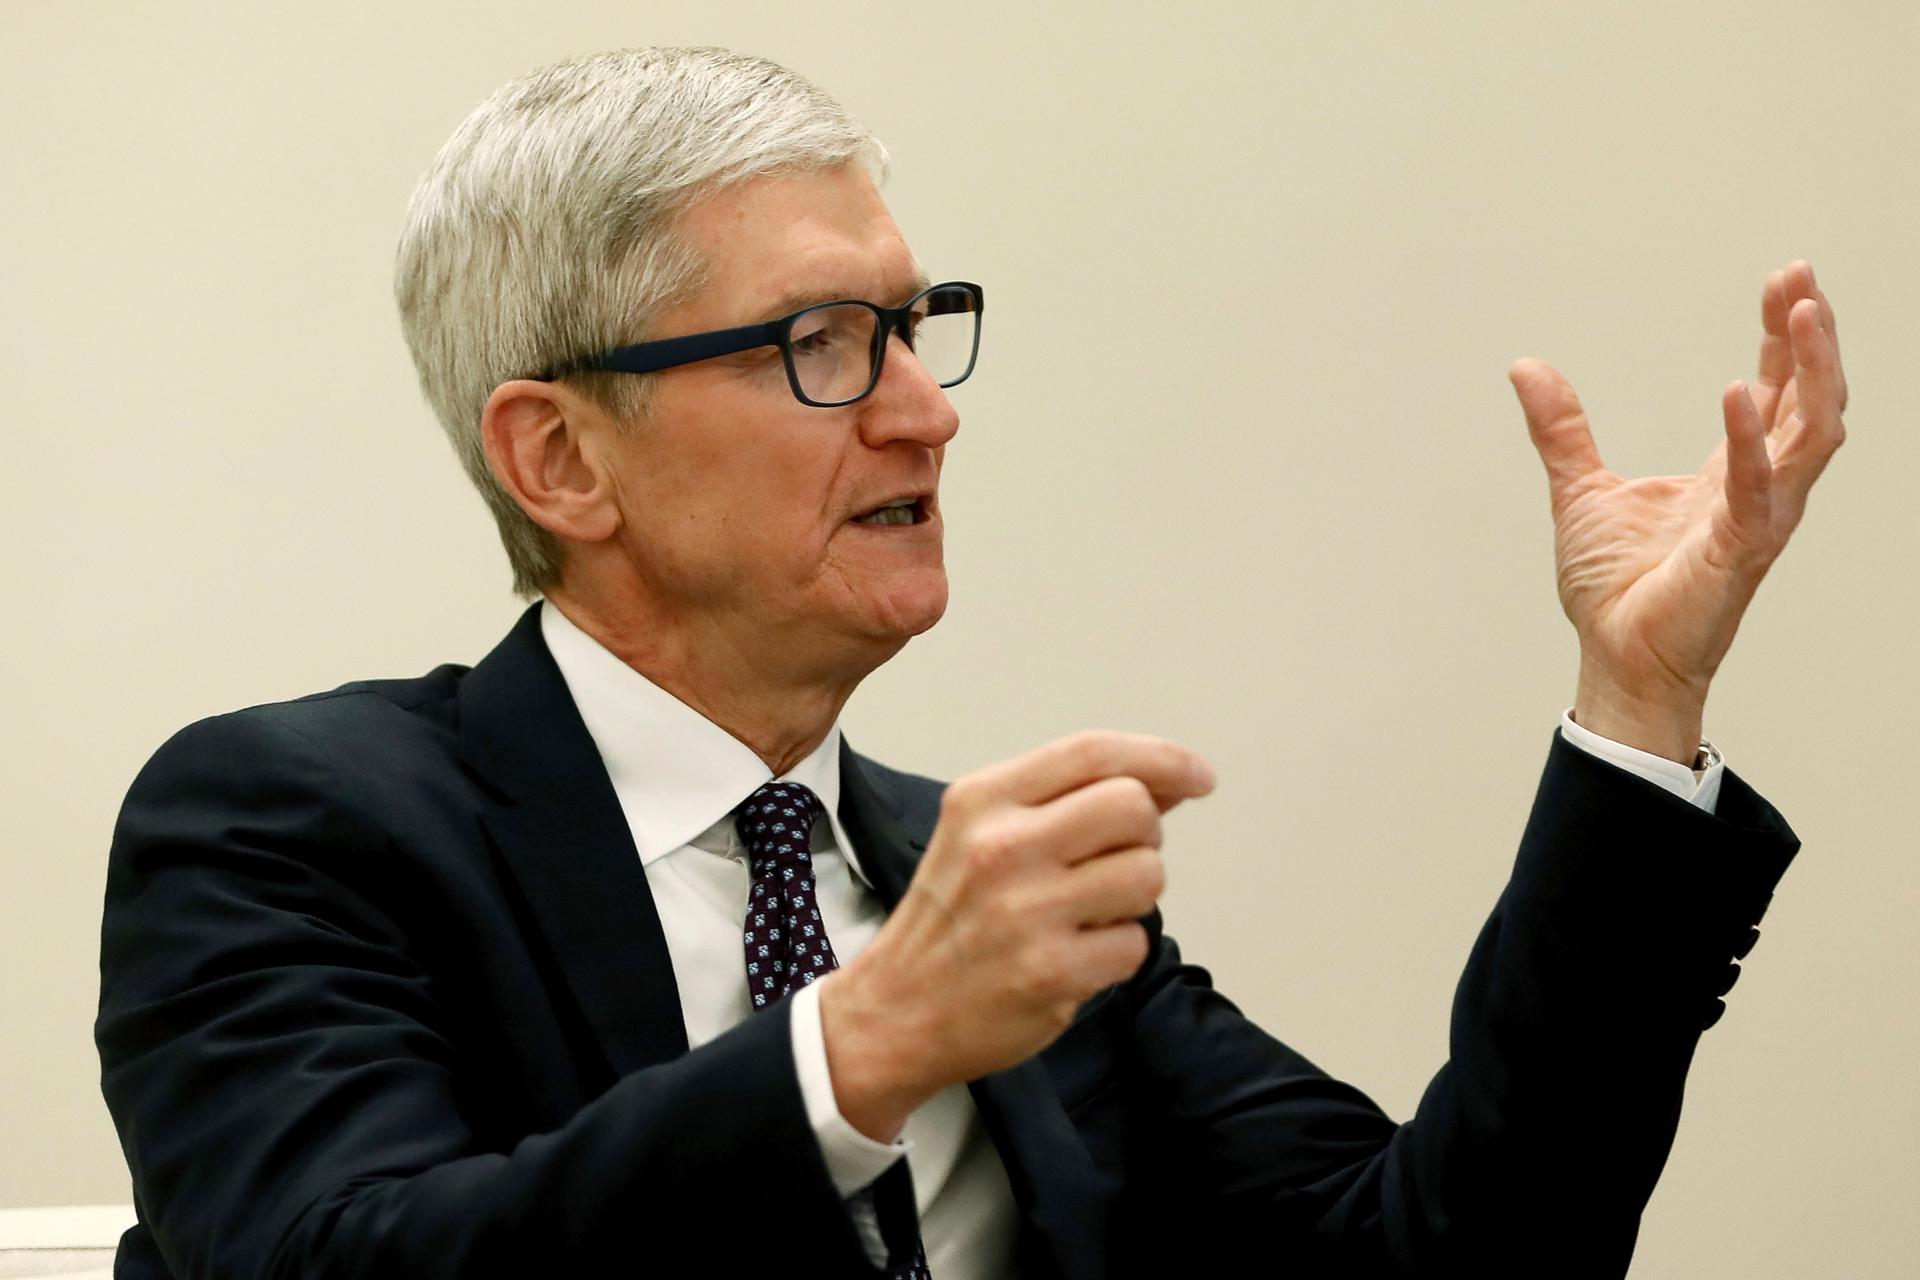 A file picture of Apple's CEO Tim Cook during a meeting. EFE/FILE/Mariscal